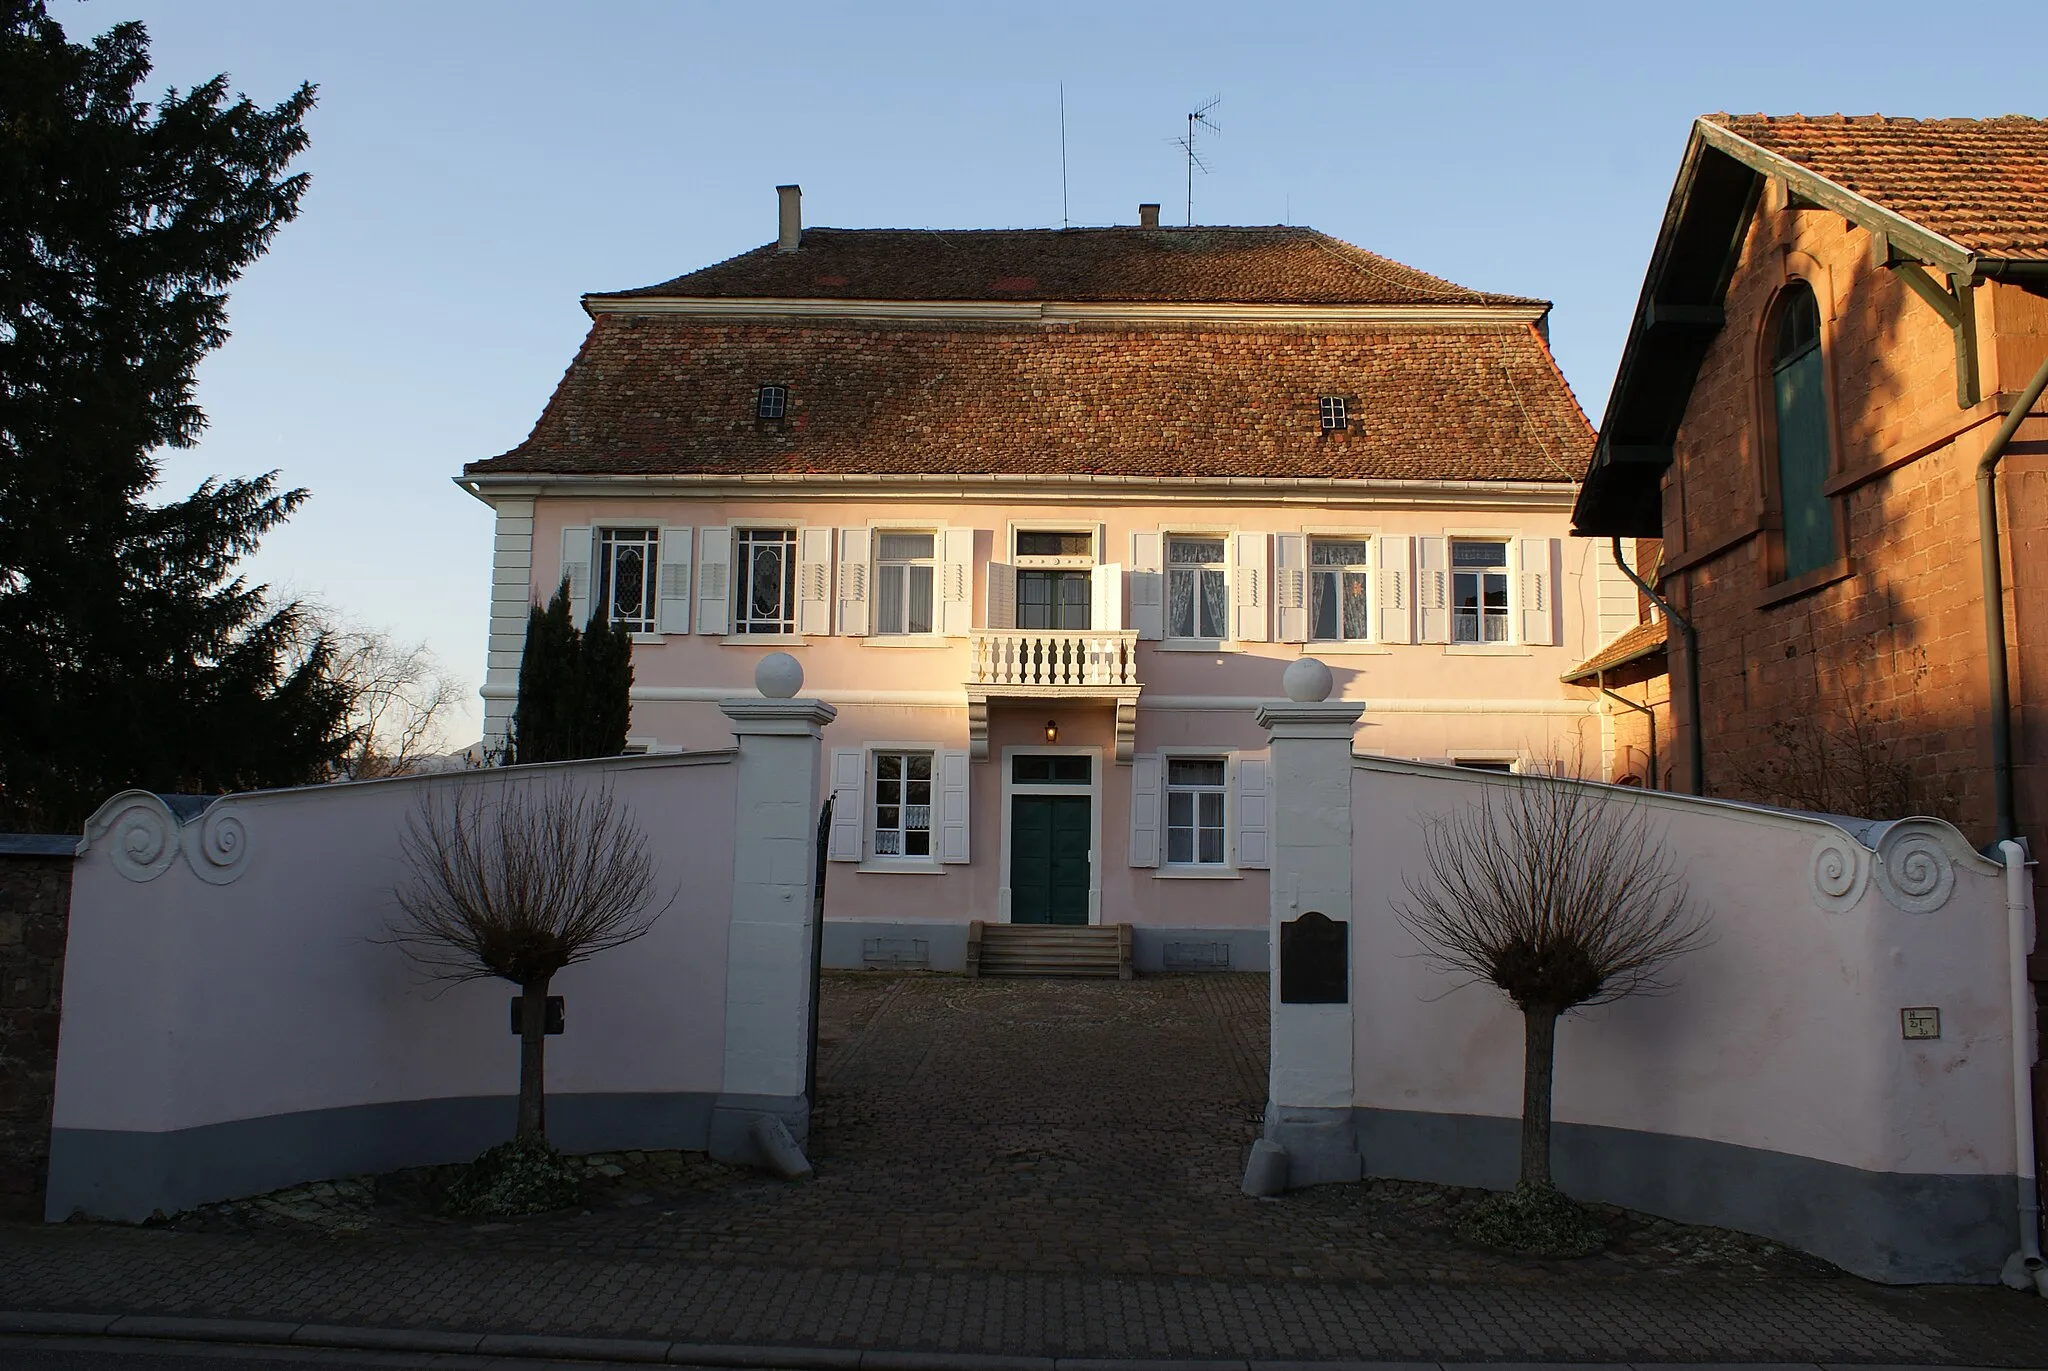 Photo showing: House of Paul Henri Thiry d’Holbach in Edesheim, Germany.